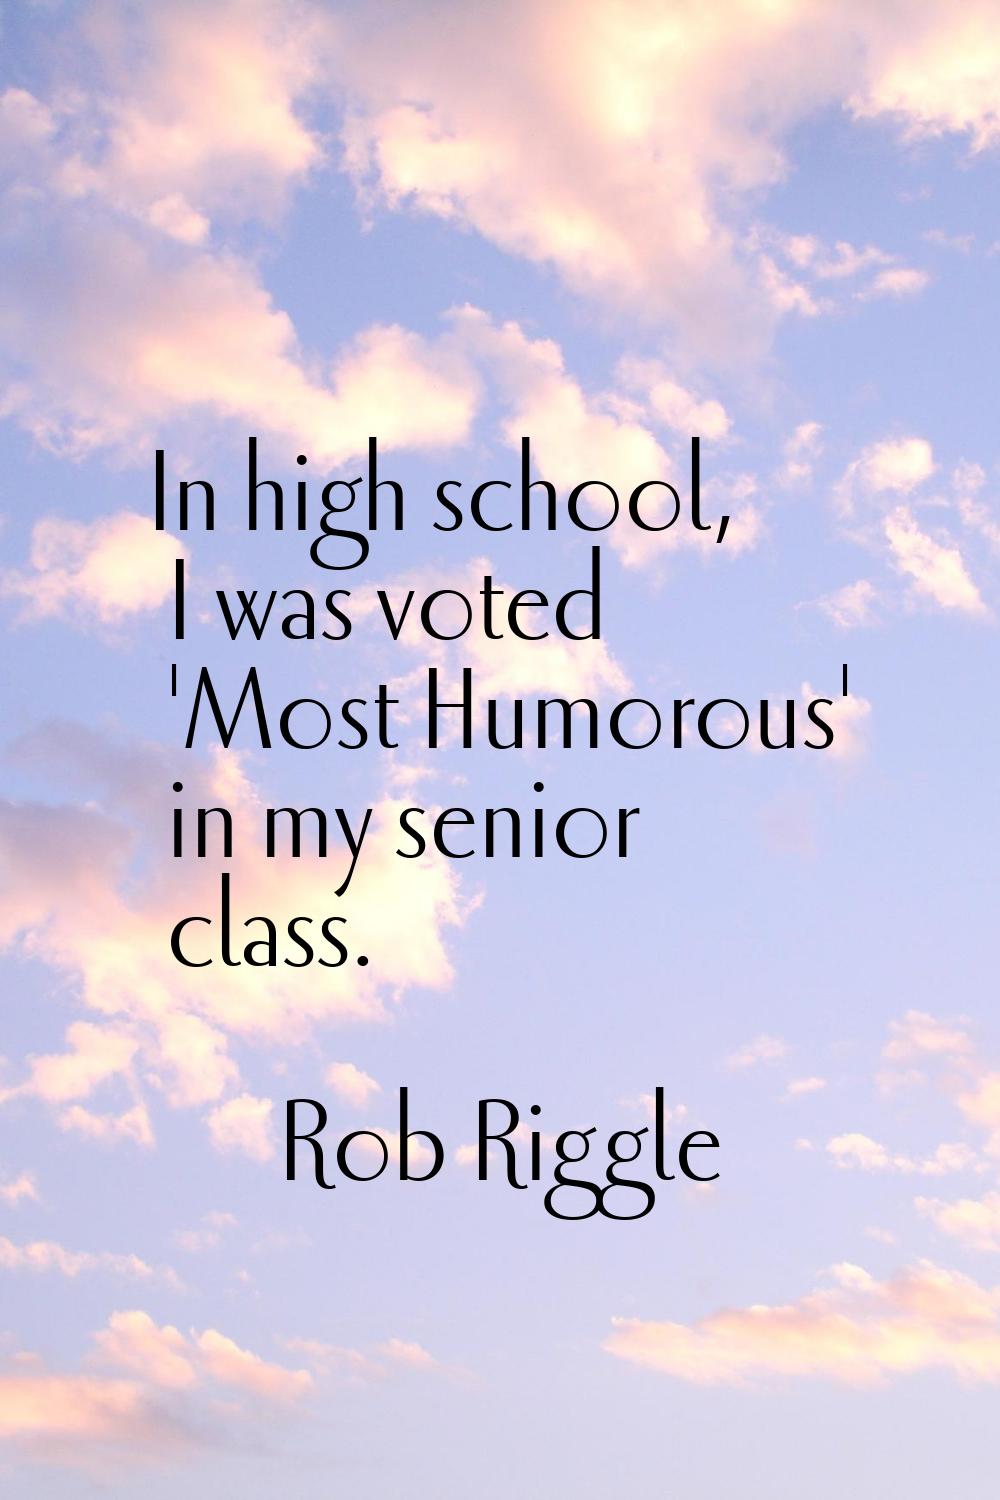 In high school, I was voted 'Most Humorous' in my senior class.